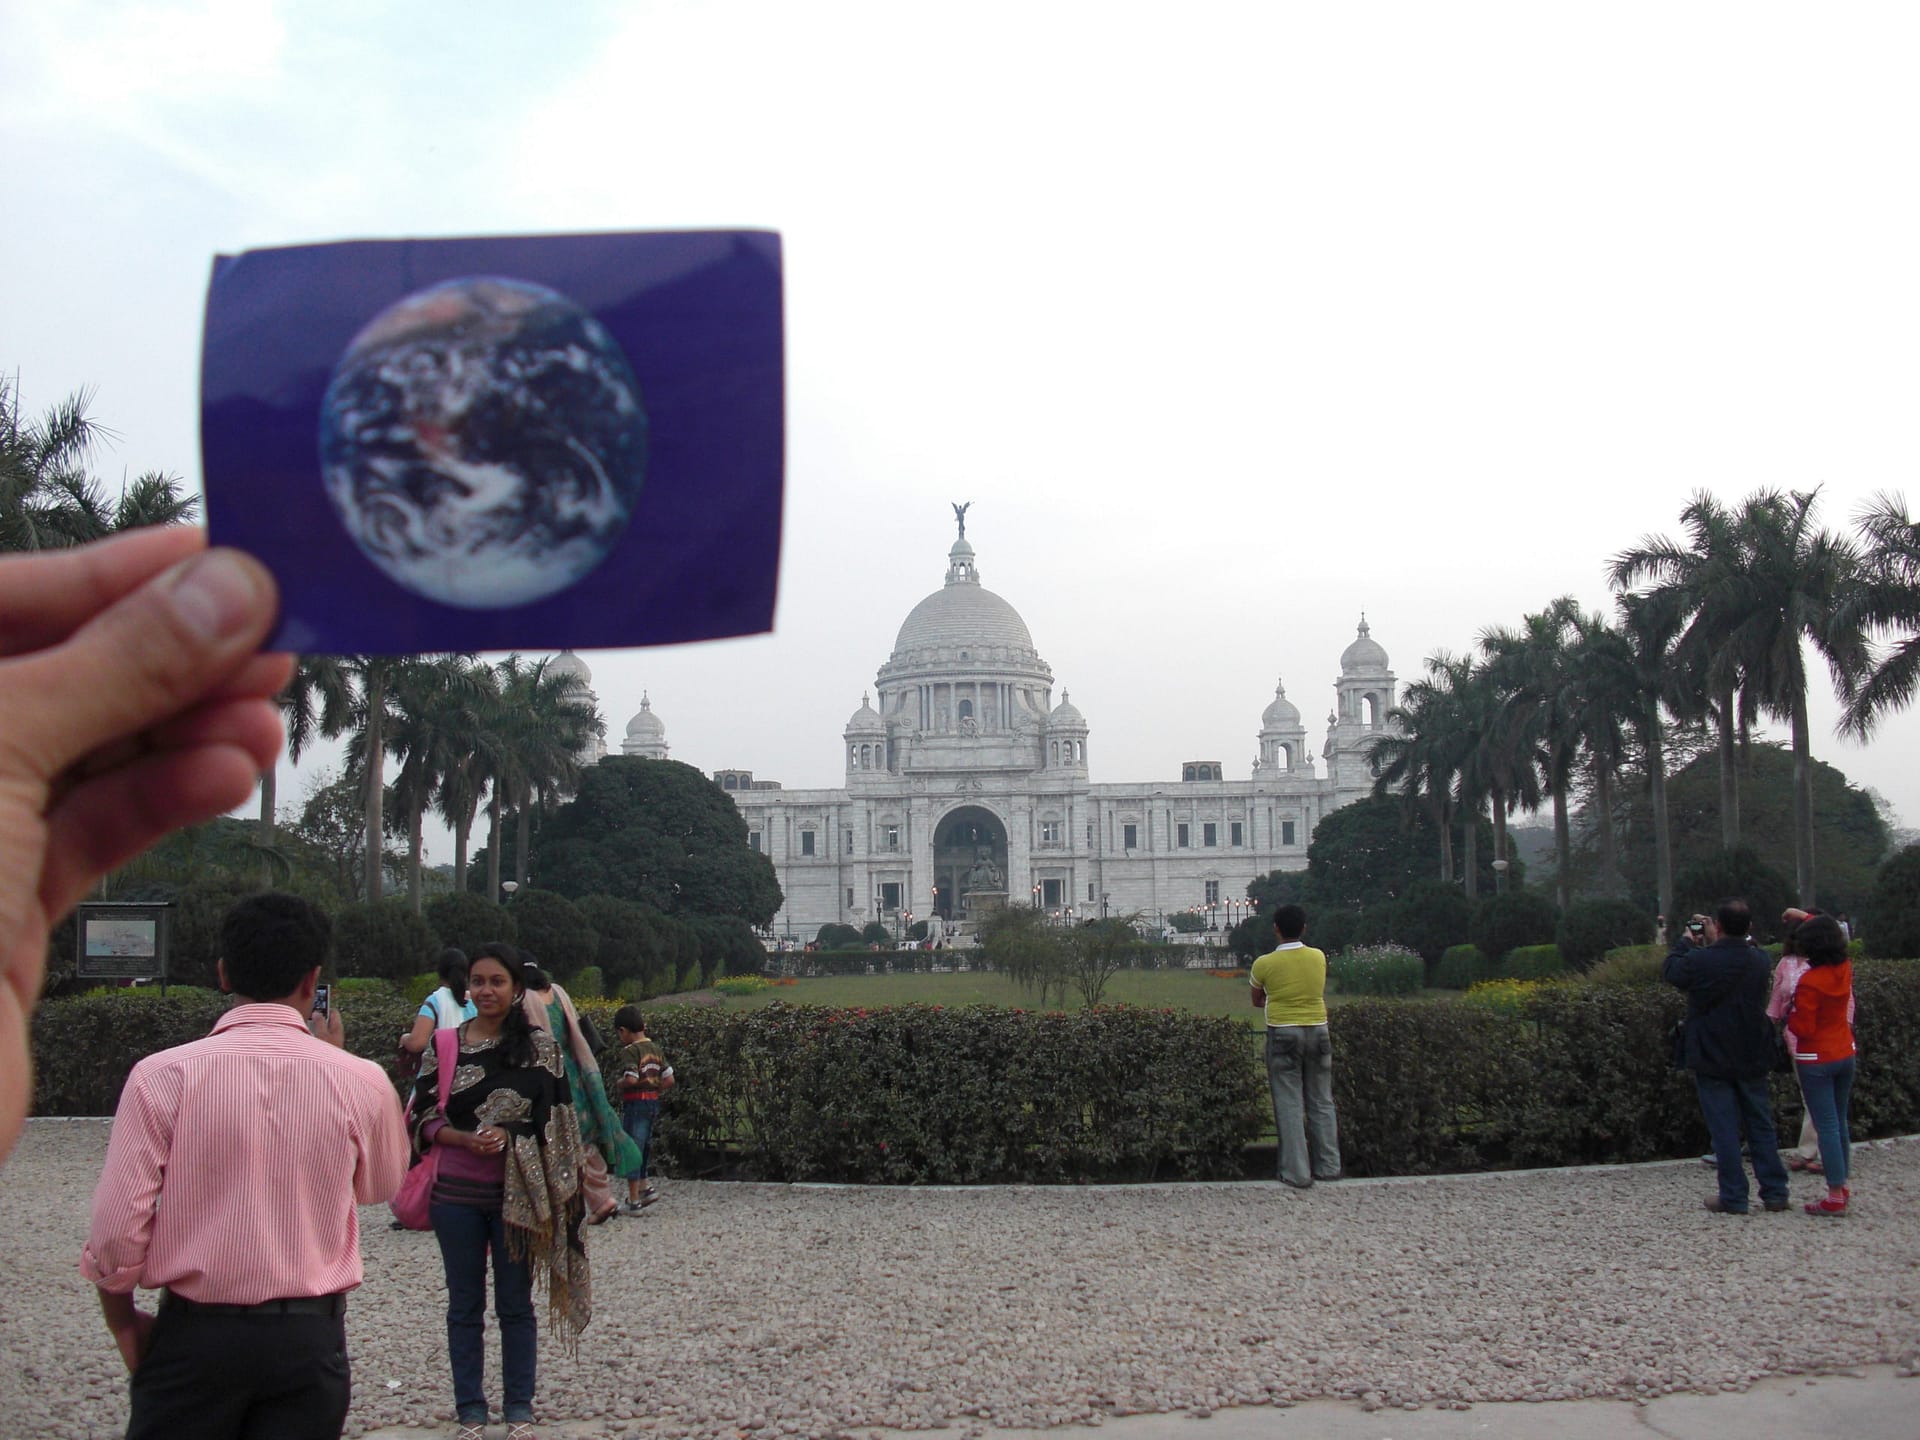 The Victoria Memorial was #EarthFlagged!